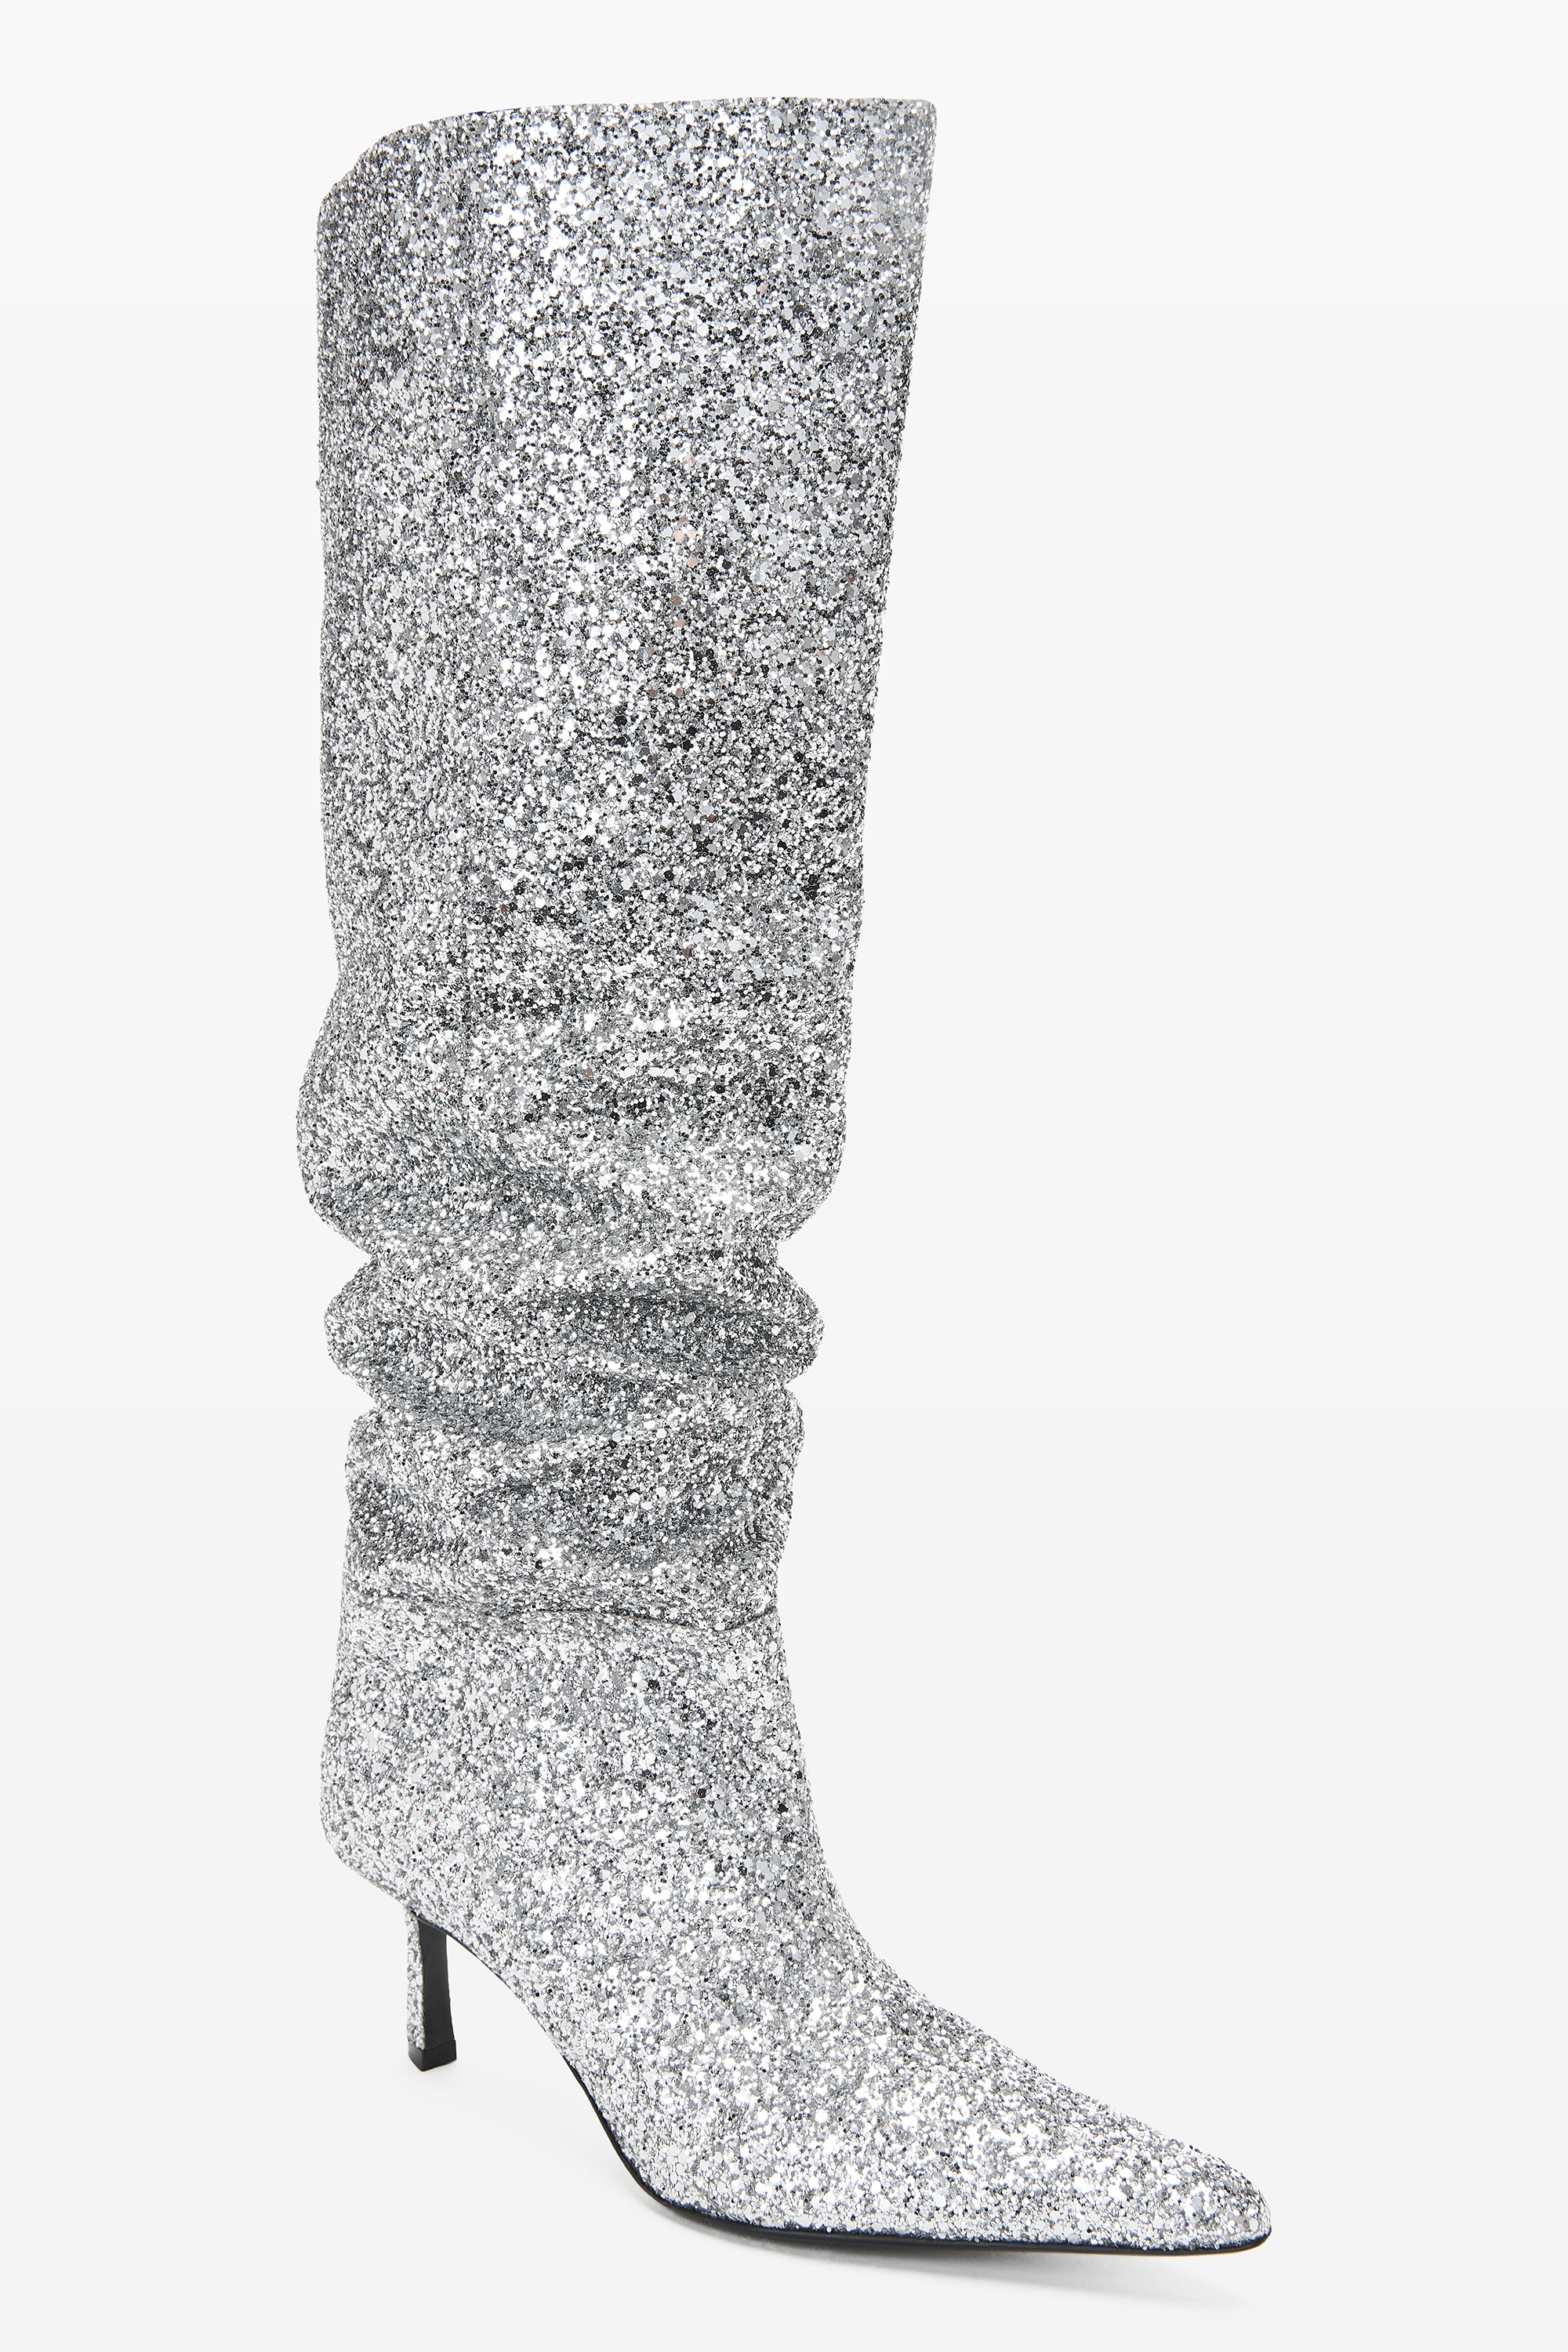 VIOLA 65 SLOUCH BOOT IN GLITTER - 2